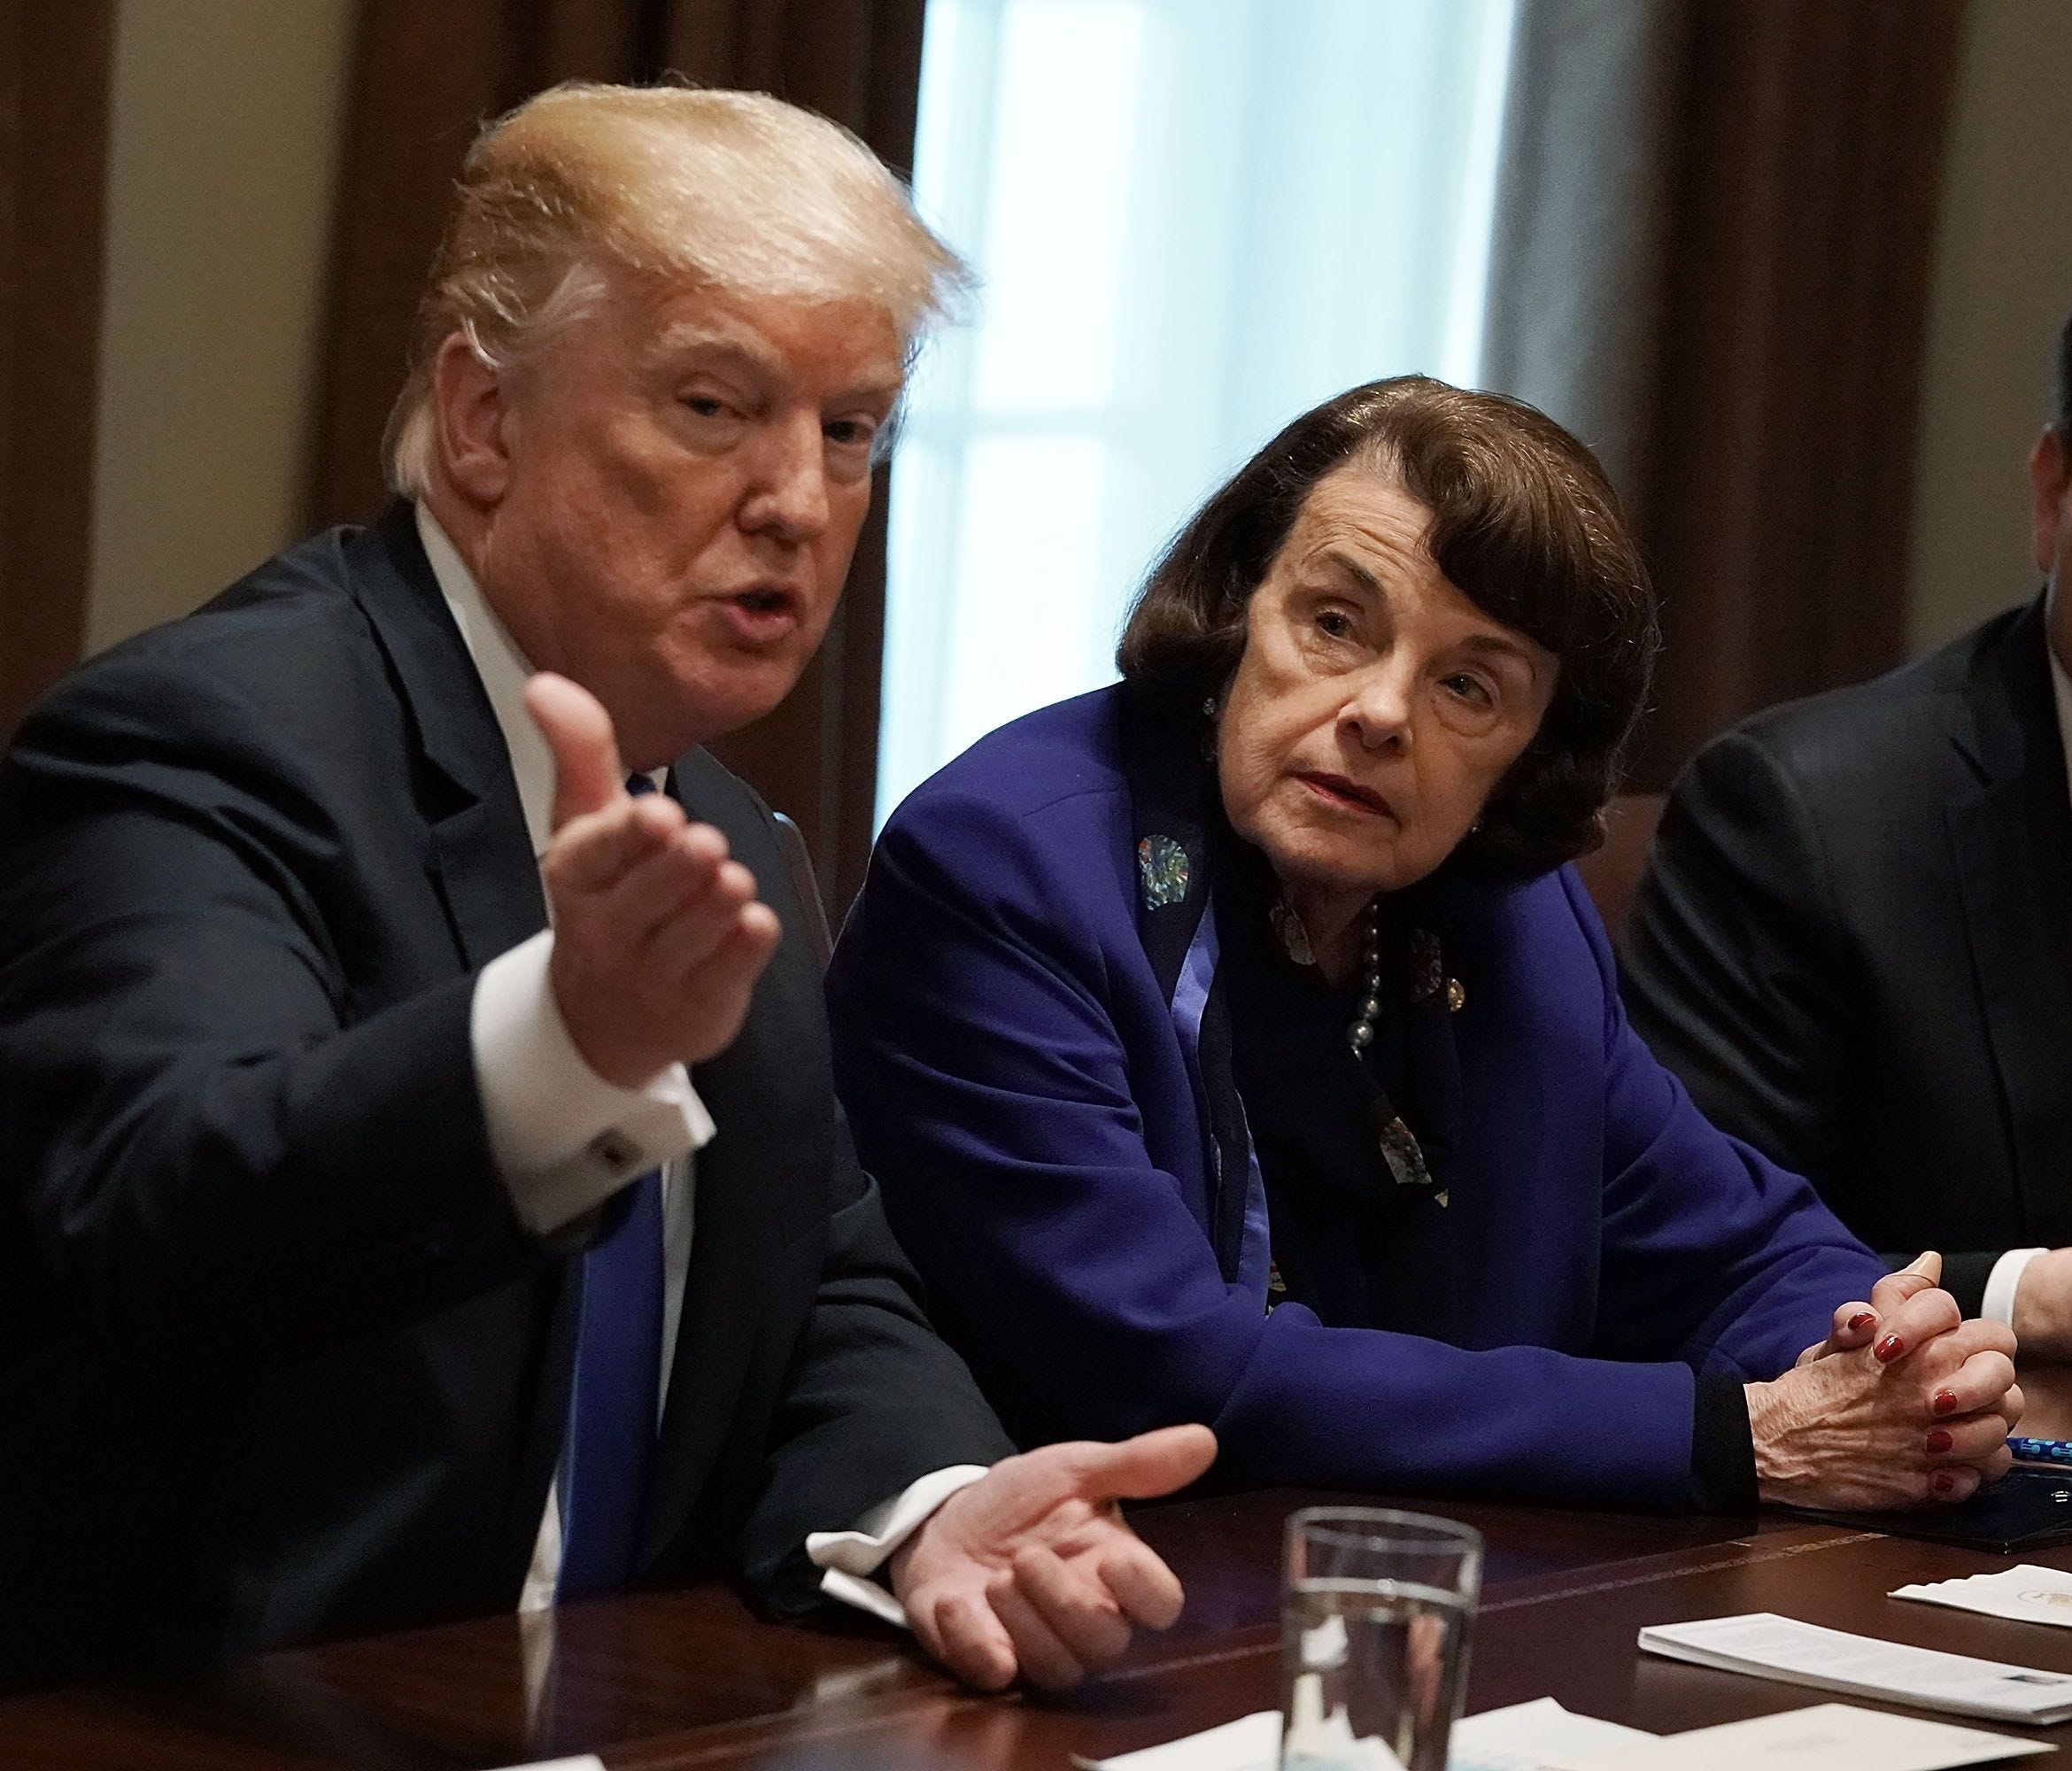 President Donald Trump speaks as Sen. Dianne Feinstein (D-CA), Sen. Marco Rubio (R-FL) and Rep. Ted Deutch (D-FL) listen during a meeting with bipartisan members of the Congress at the Cabinet Room of the White House February 28, 2018 in Washington, 